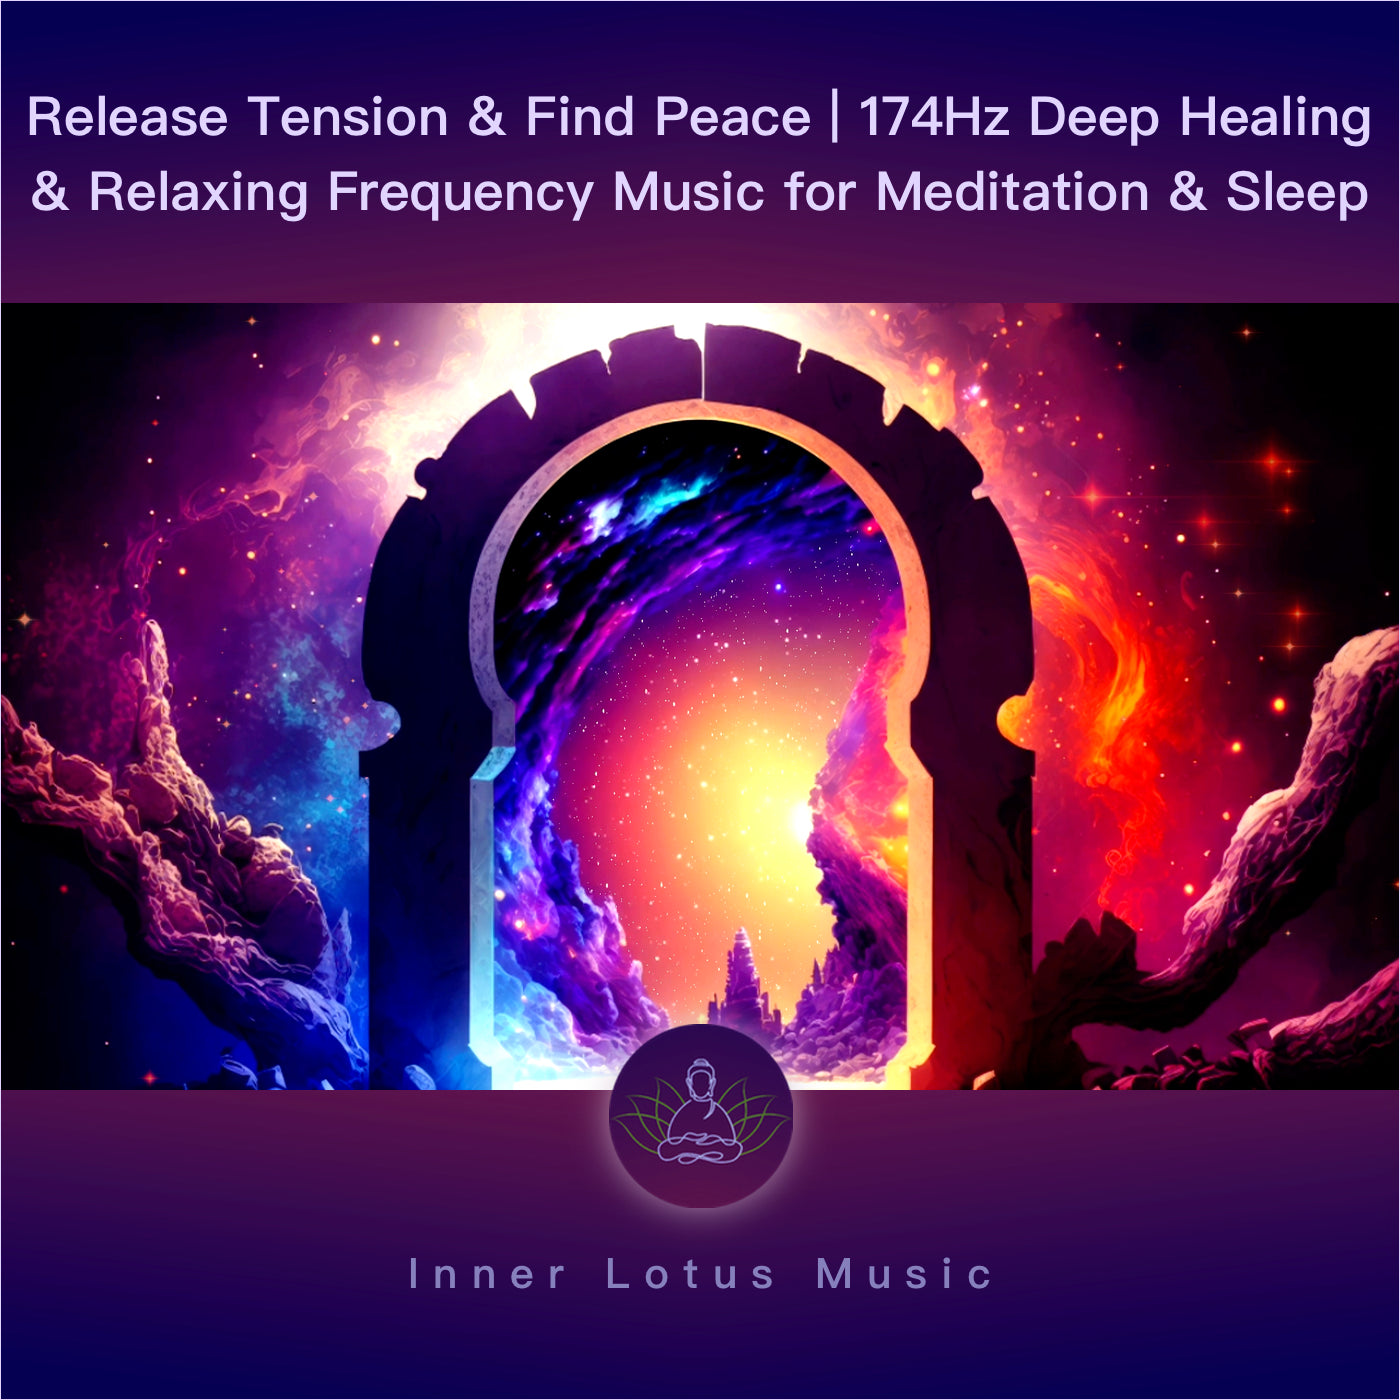 Release Tension & Find Peace | 174Hz Deep Healing & Relaxing Frequency Music for Meditation & Sleep